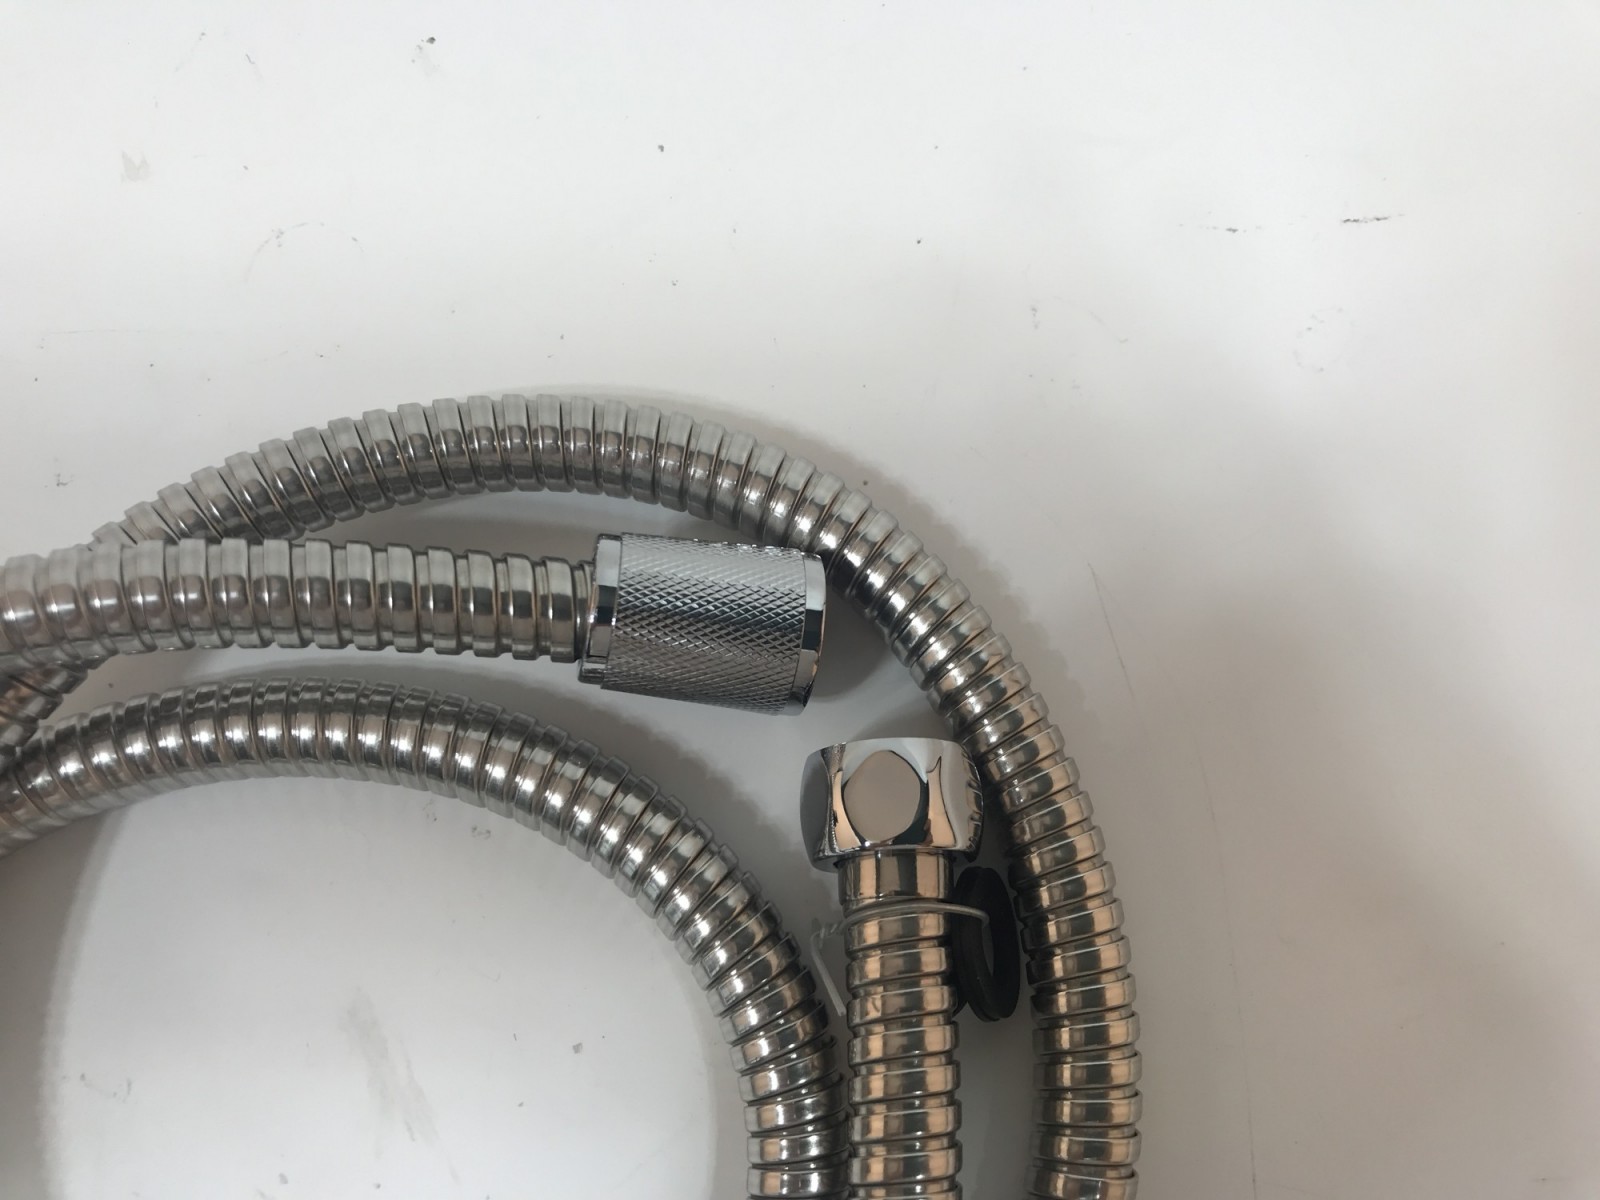 Wavraging High-Pressure Detachable Showerheads and Components thereof with Hose, delivering an exceptional shower experience